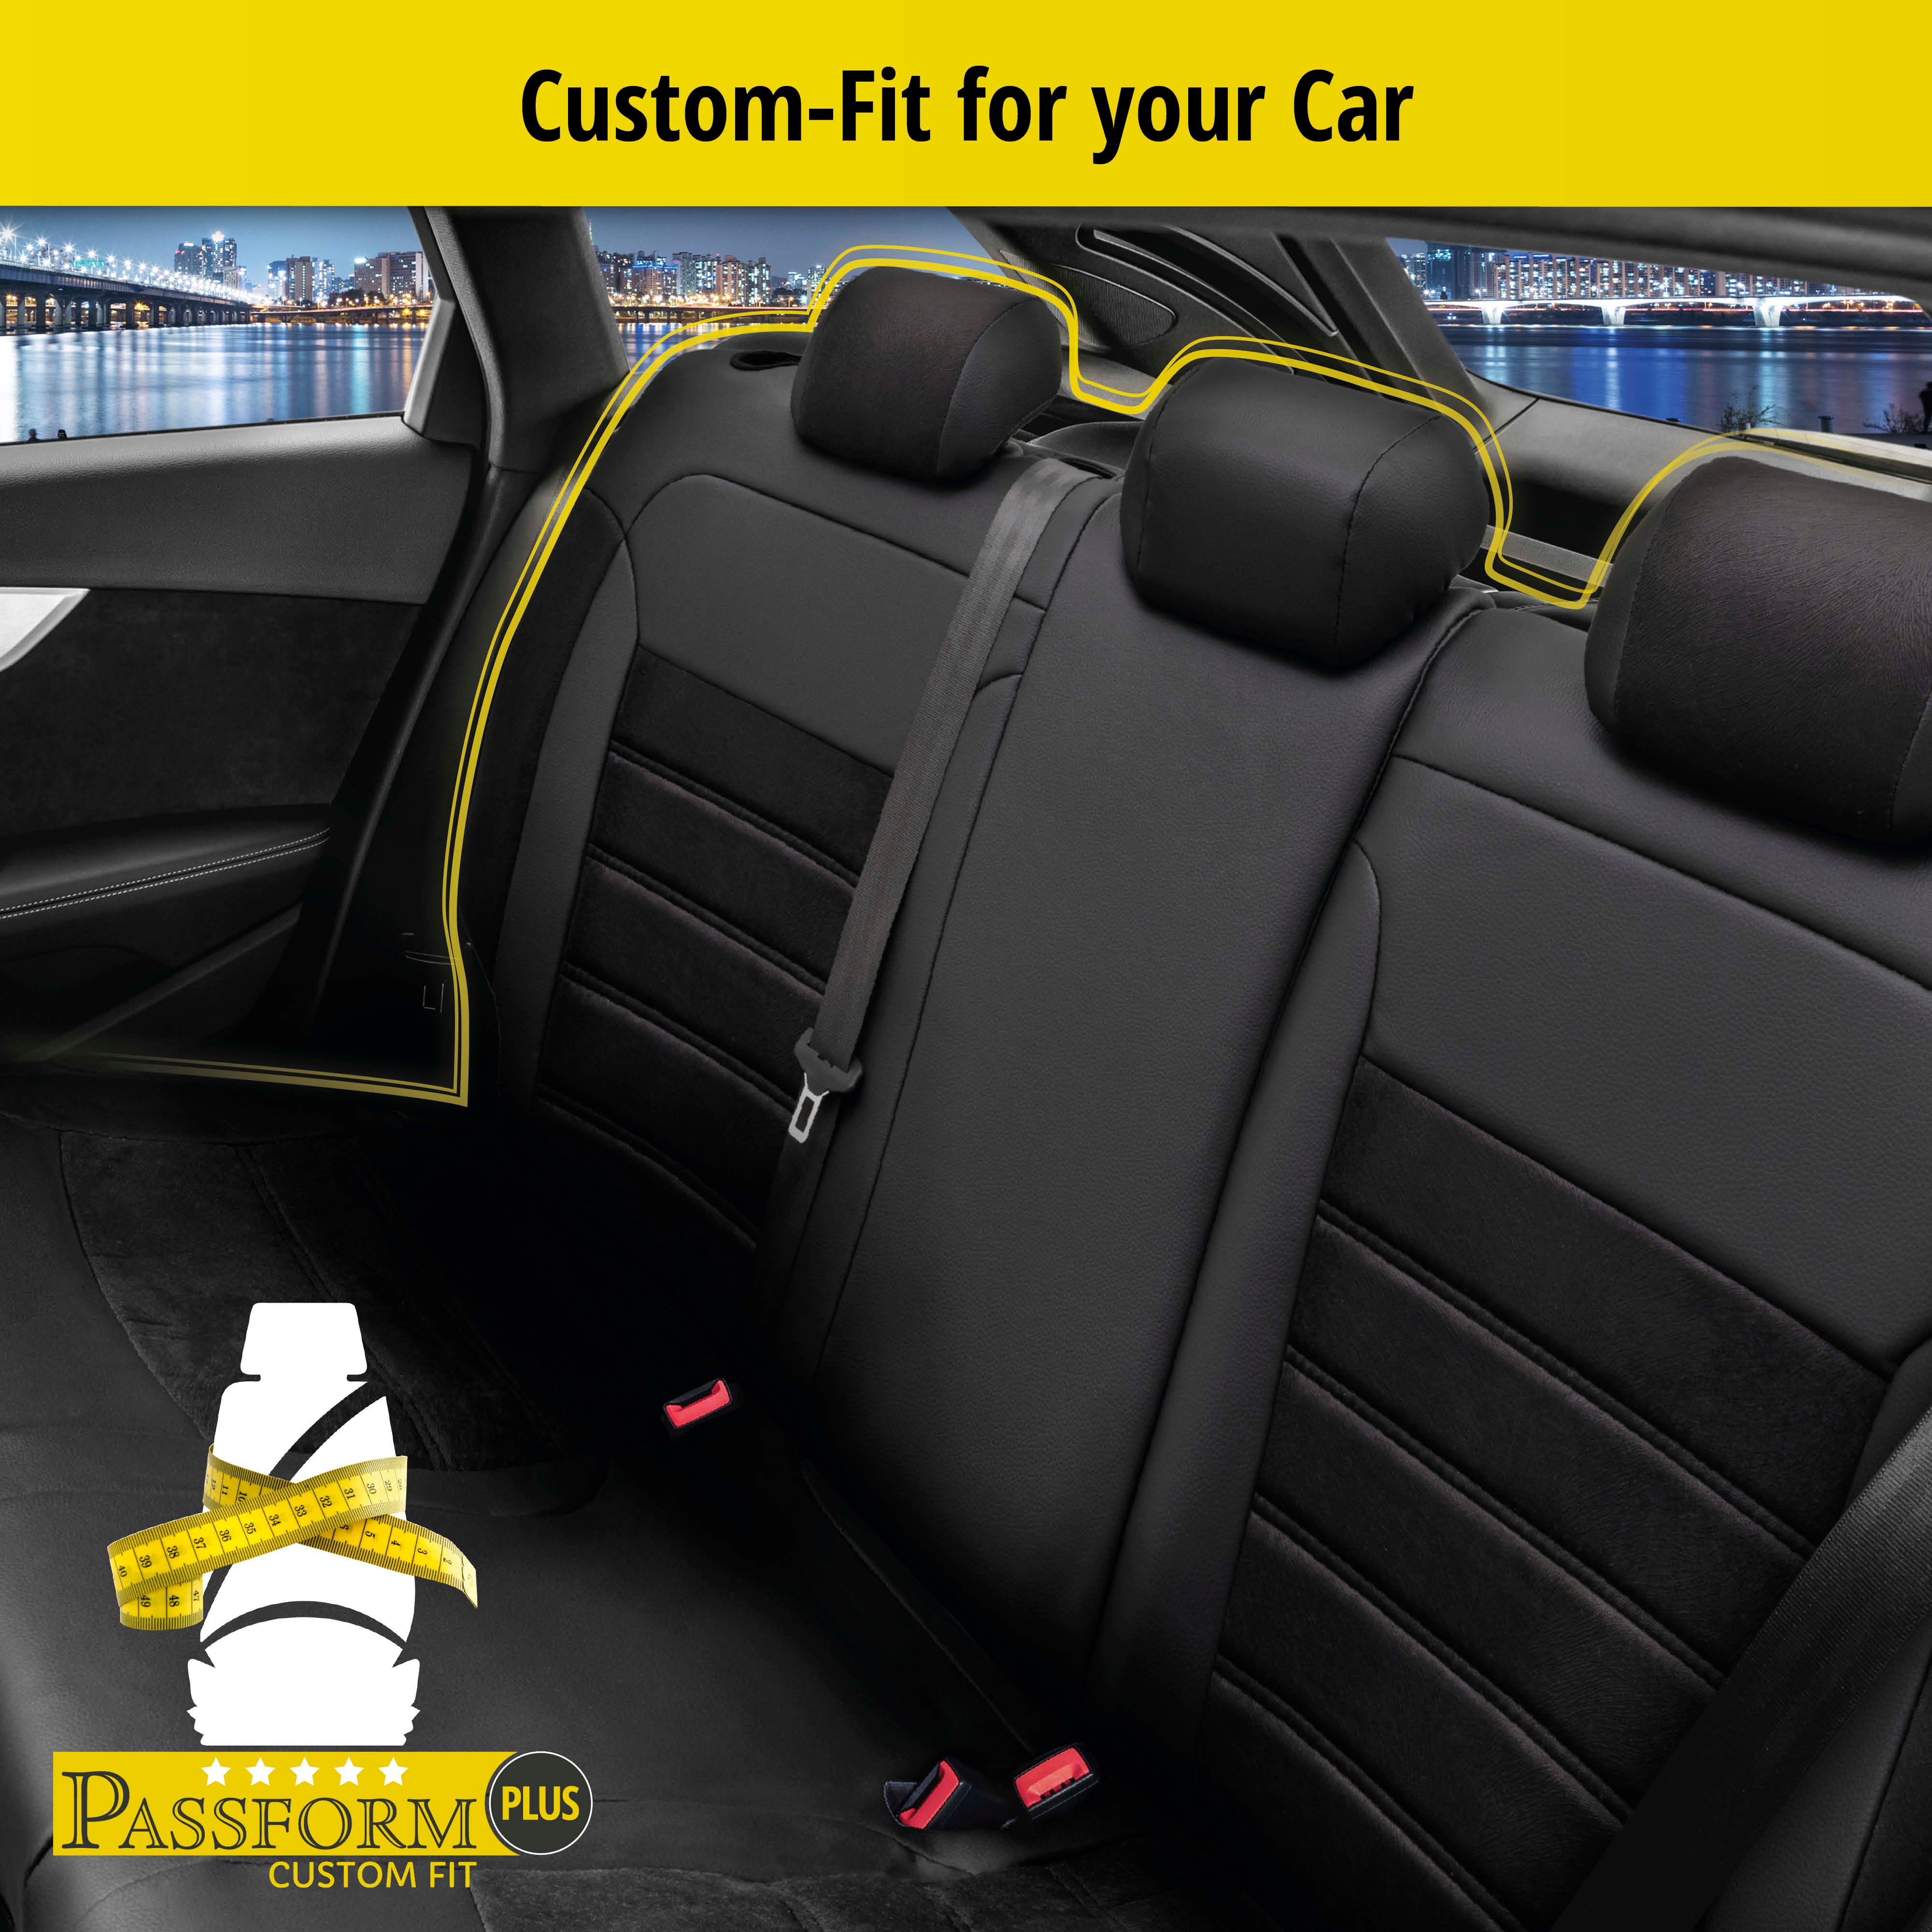 Seat Cover Bari for VW Passat Comfortline 2015-Today, 1 rear seat cover for normal seats